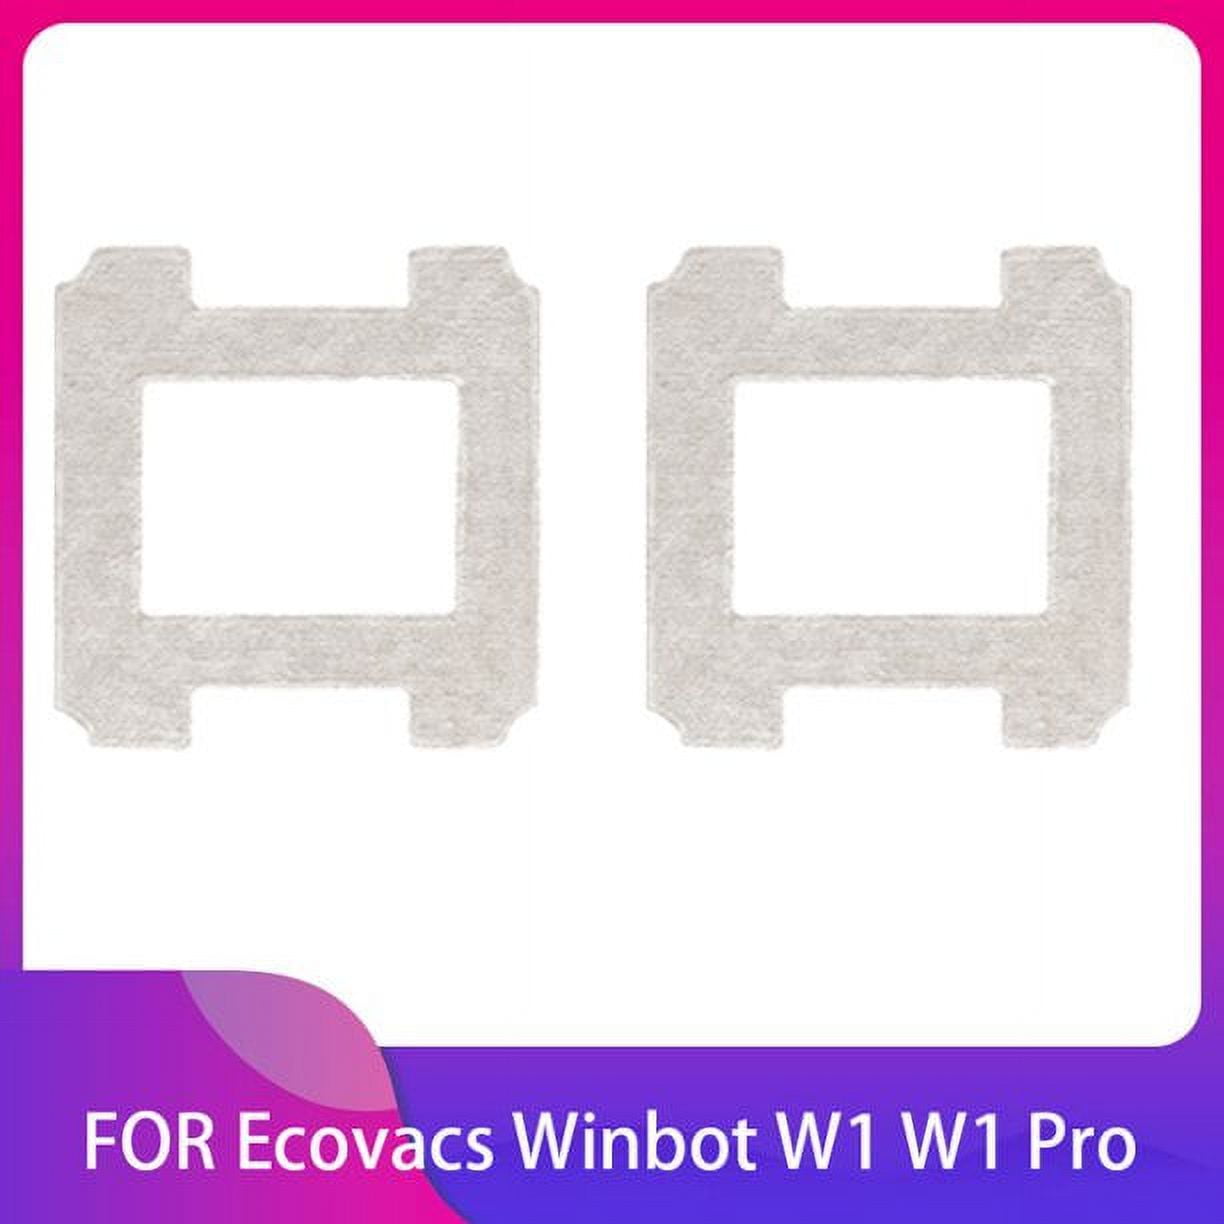 Ecovacs Winbot W1 Pro Replacement, Ecovacs Winbot Accessories